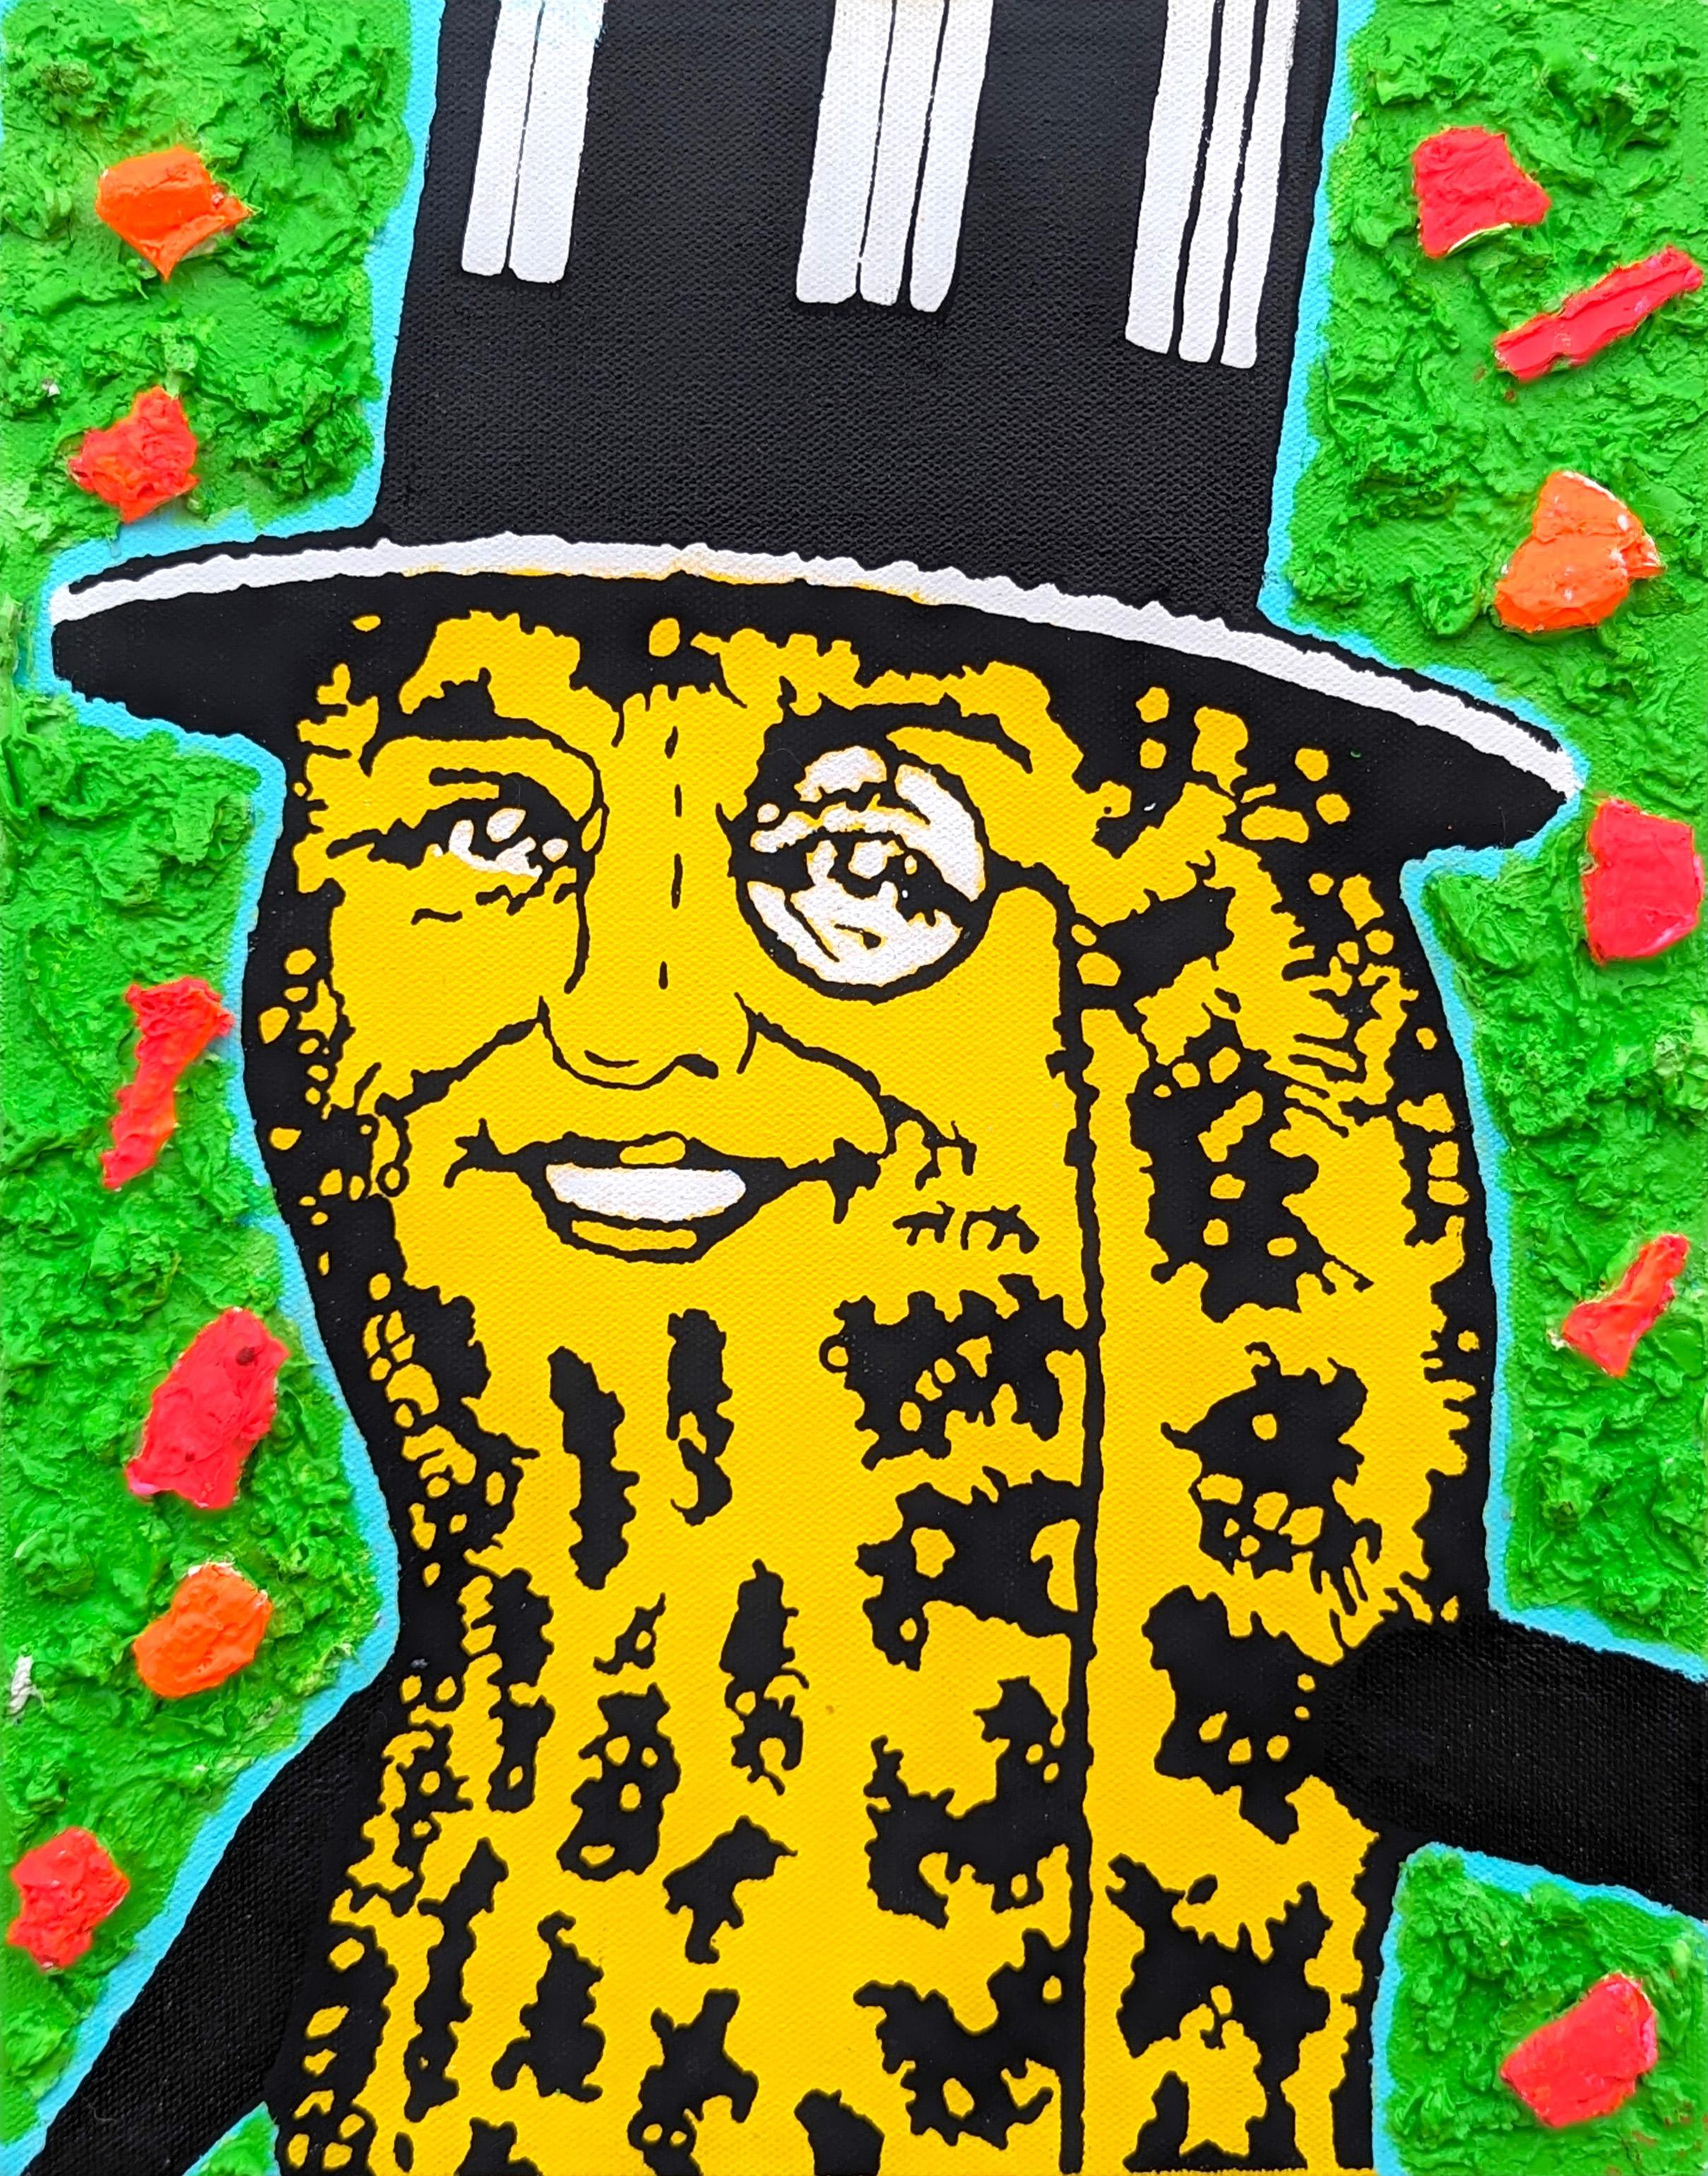 Clark V. Fox Portrait Painting - "2001 Kabal" Contemporary Neon Pop Culture Painting of Mr. Peanut Against Green 